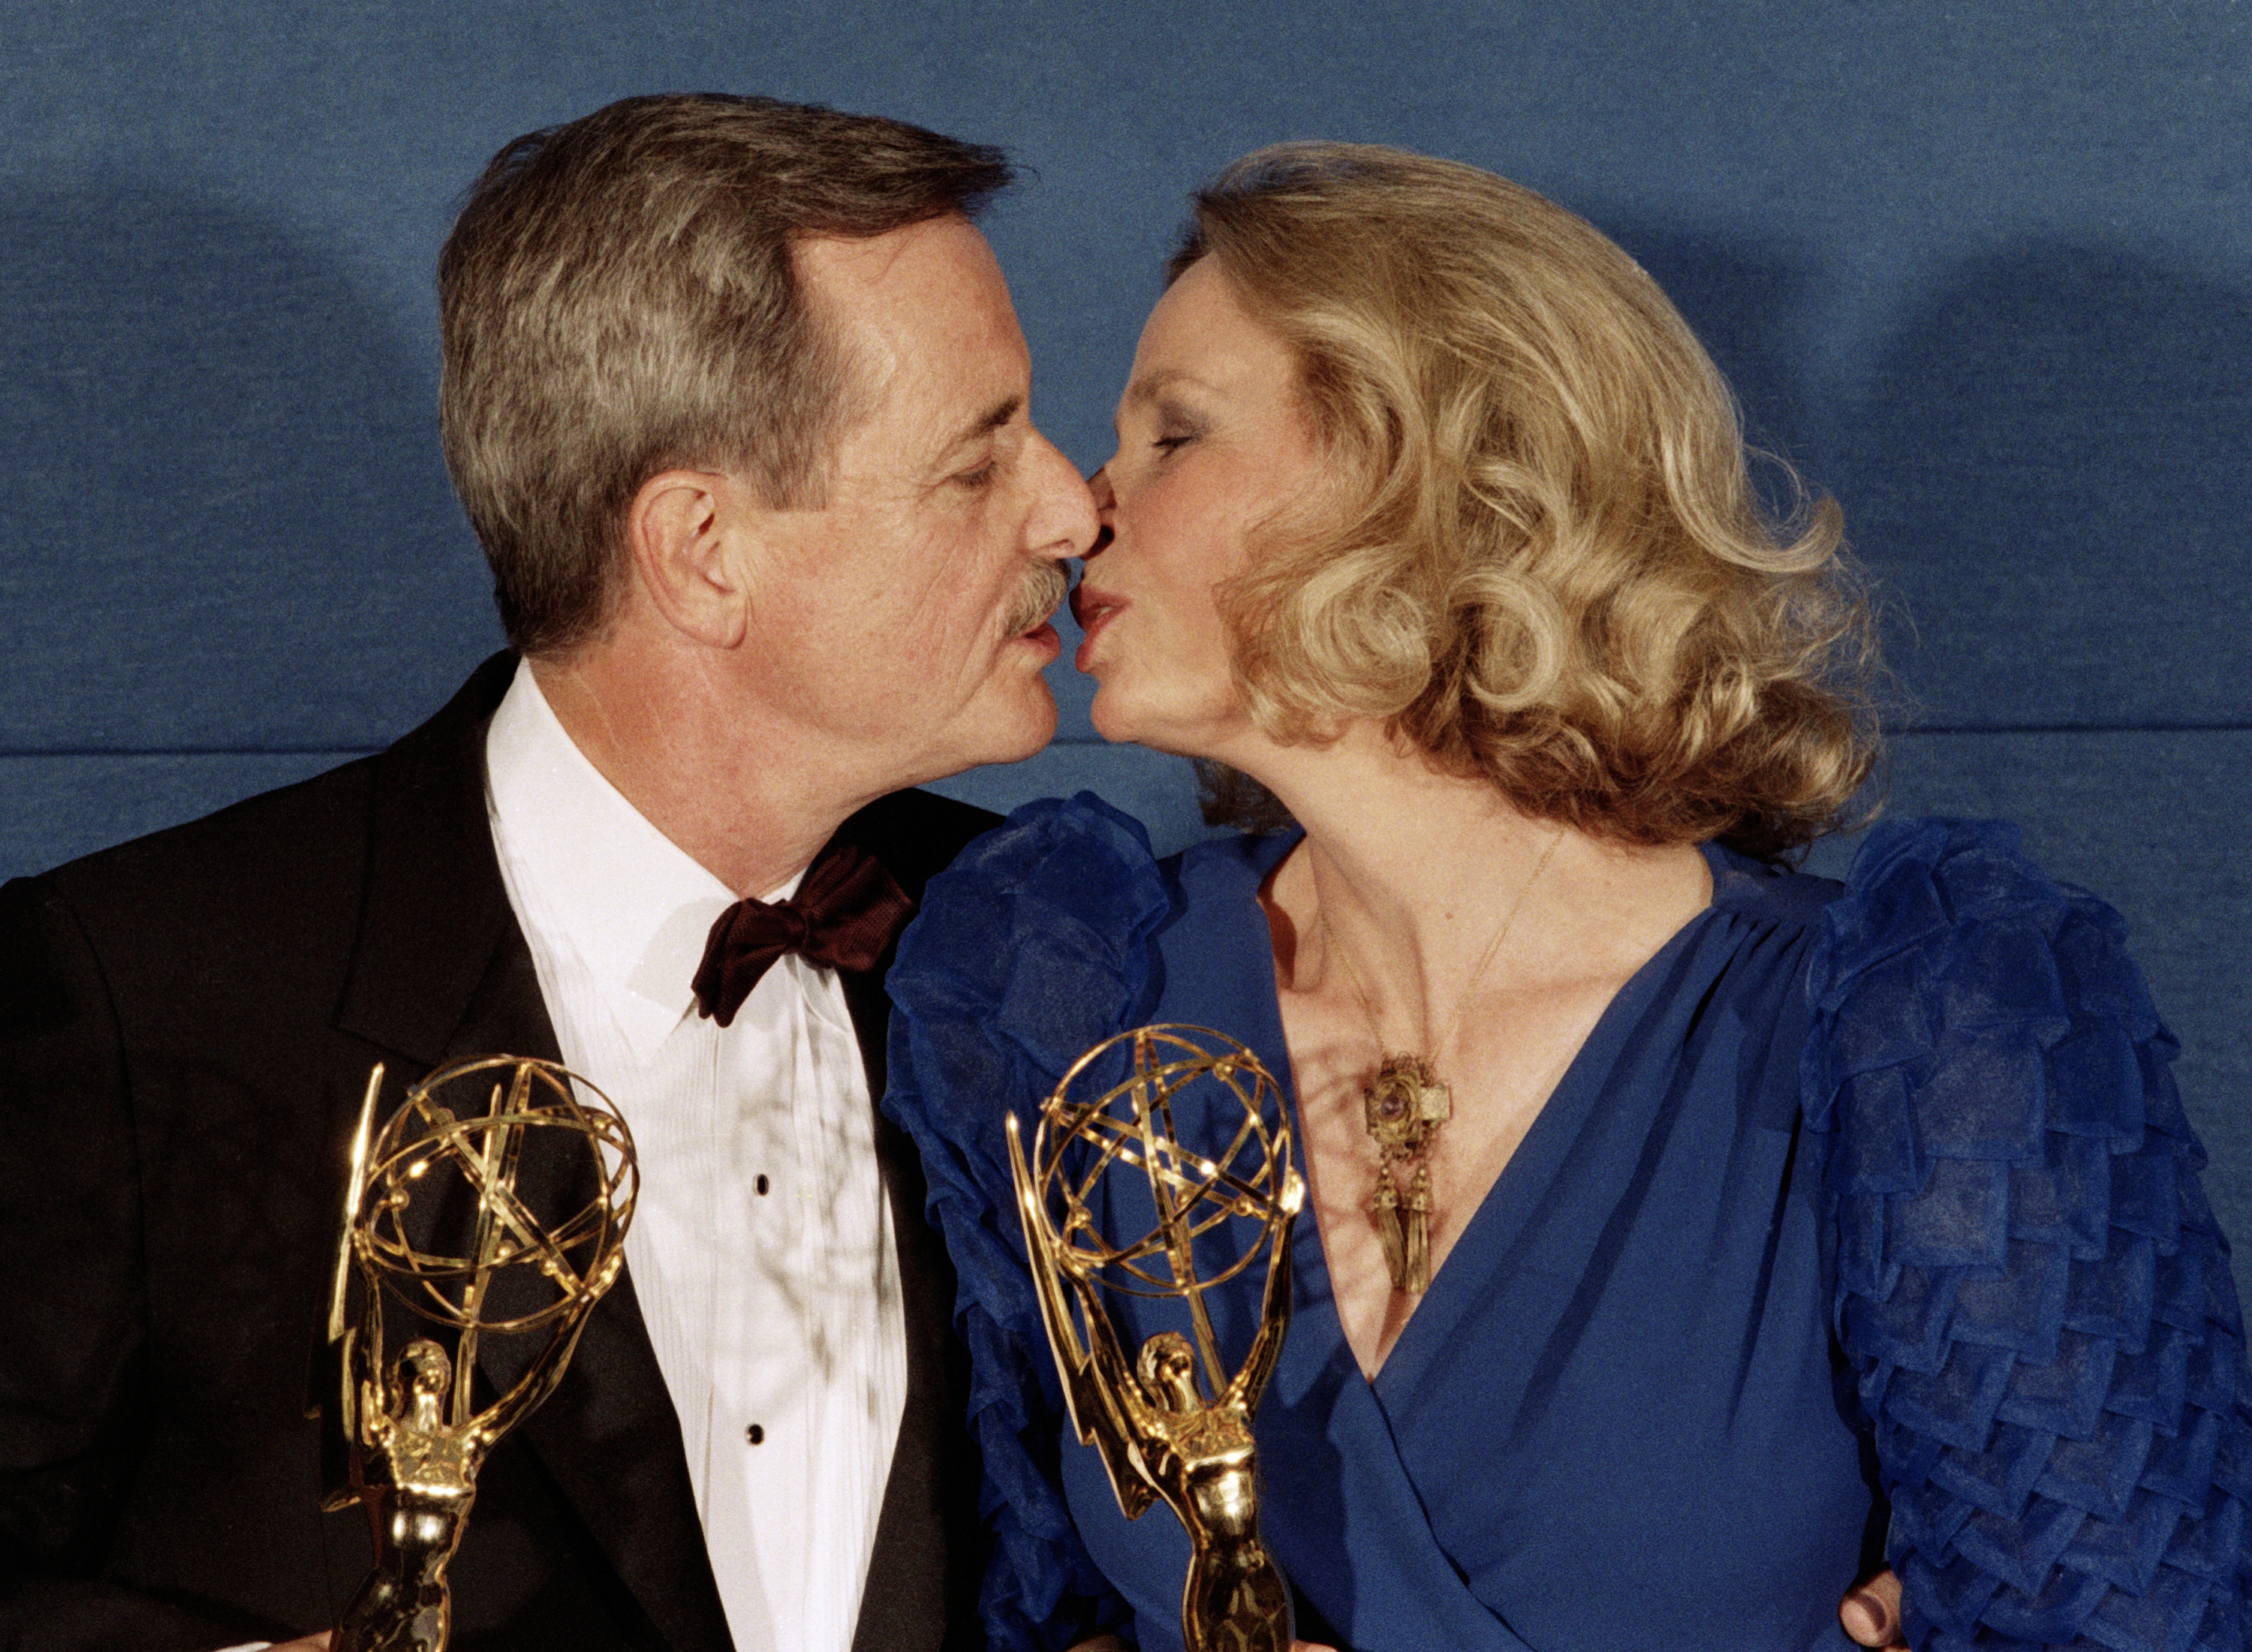 Emmy Winners and real-life husband and wife William Daniels and Bonnie Bartlett celebrating their Emmy Awards with a kiss backstage at the Emmy Awards Show, September 21, 1986 in Pasadena, California | Source: Getty Images